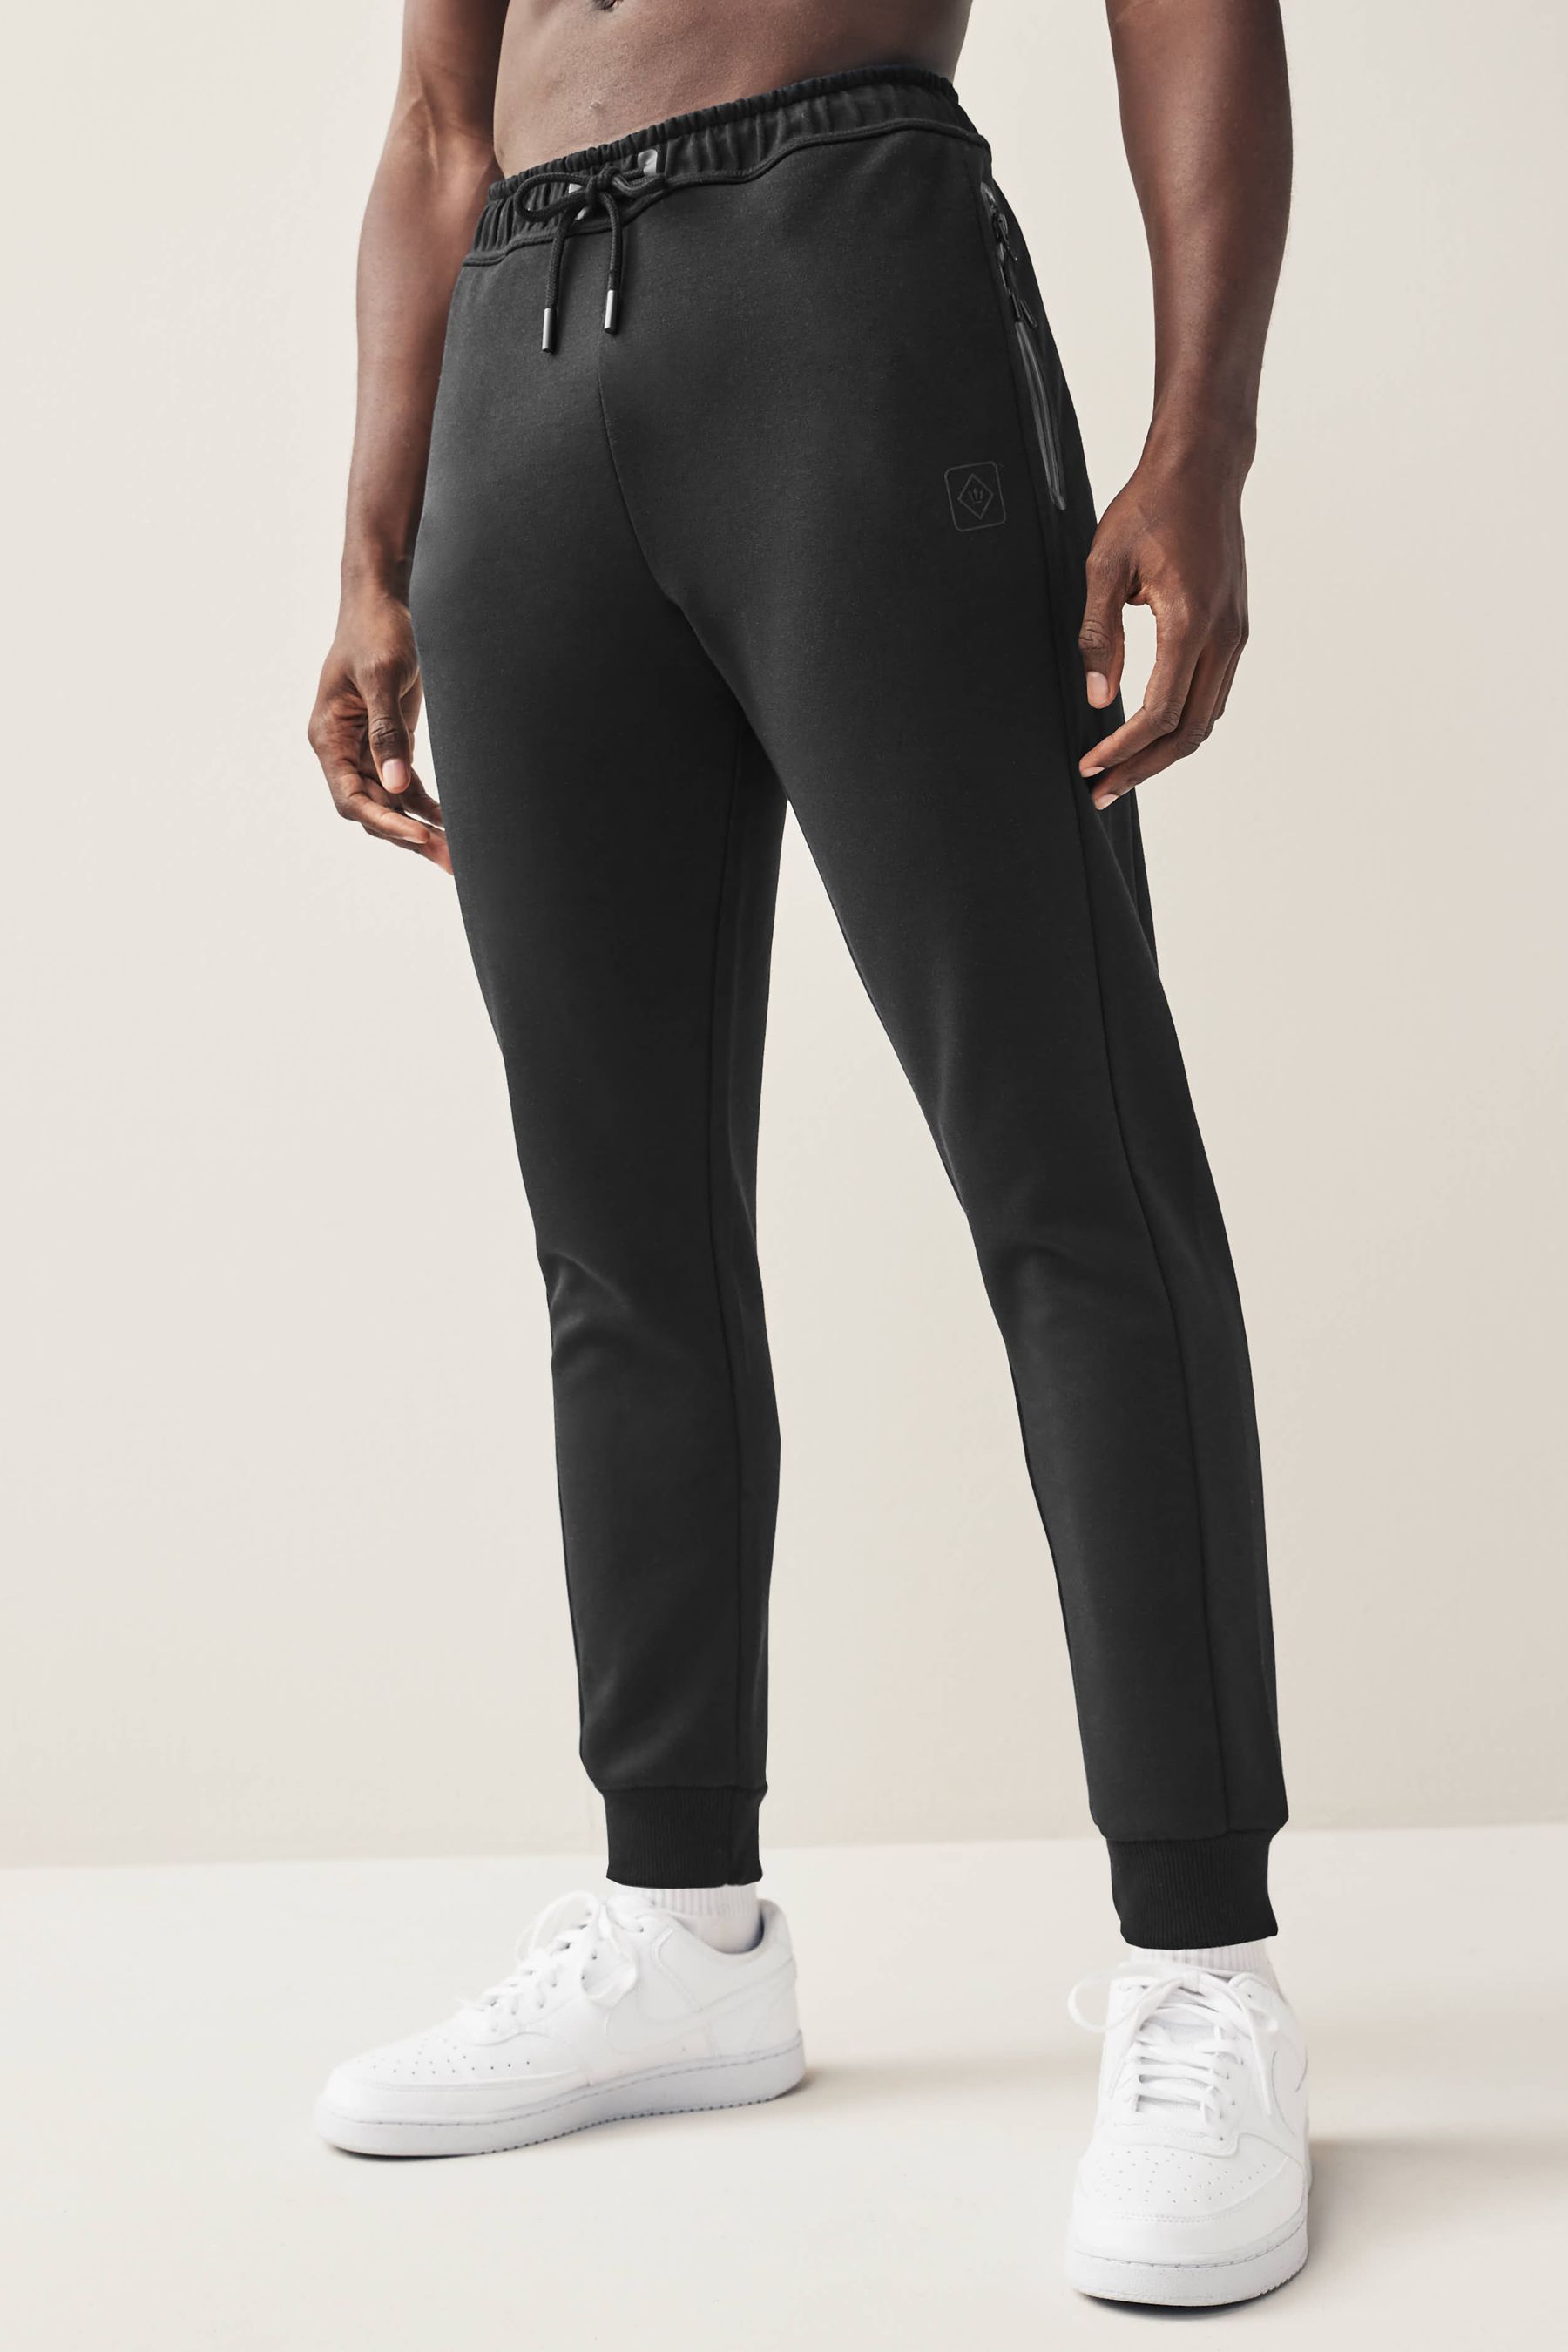 Buy Black Athleisure Joggers from the Next UK online shop